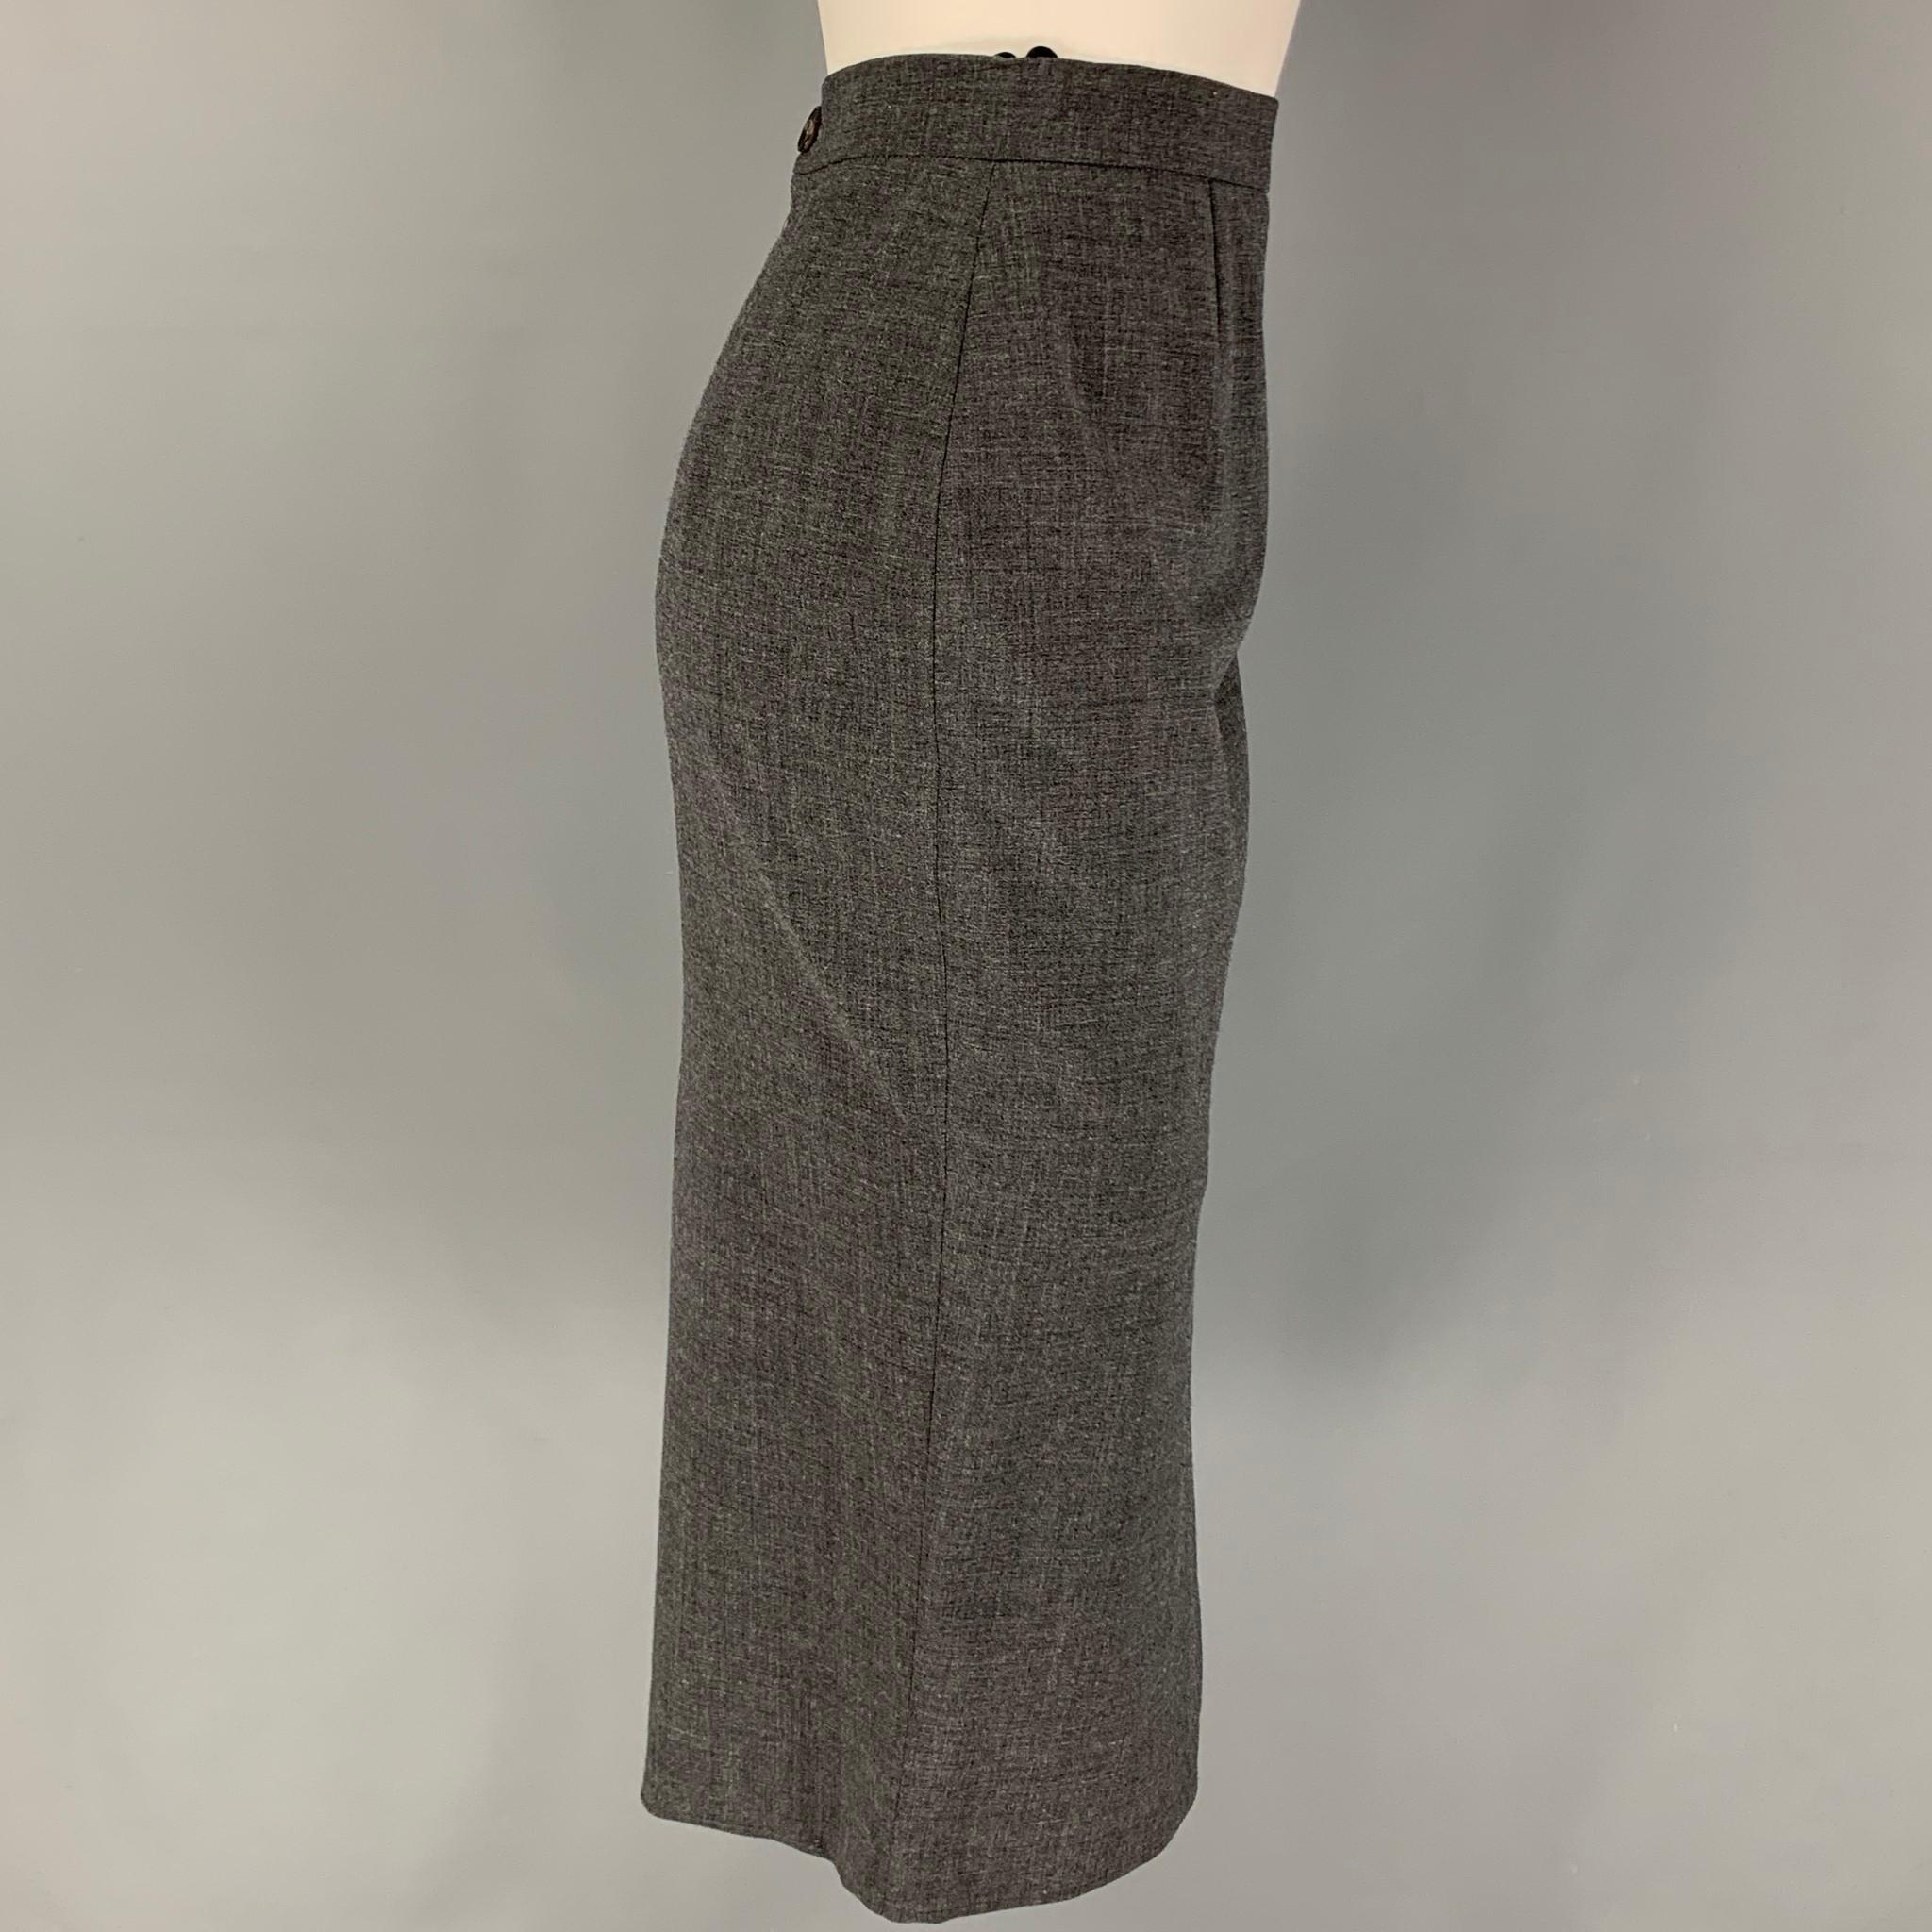 MOSCHINO COUTURE skirt comes in a grey wool / polyamide featuring a pencil style, 'secrets' slit design, and a back zip & button closure. Made in Italy.

Very Good Pre-Owned Condition.
Marked: I 10 / D 36 / F 36 / GB 8 / USA 6

Measurements:

Waist: